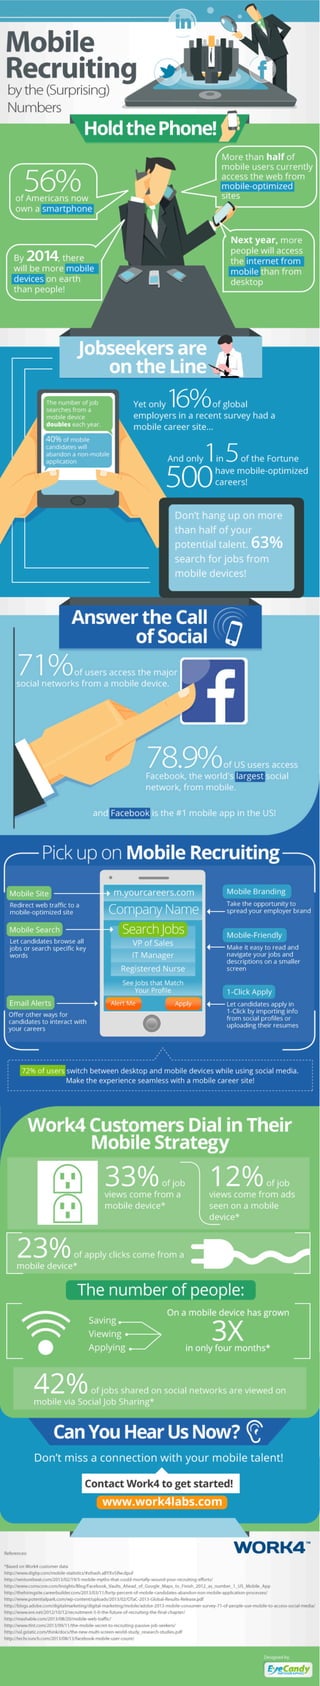 Mobile Recruiting by the (Surprising) Numbers